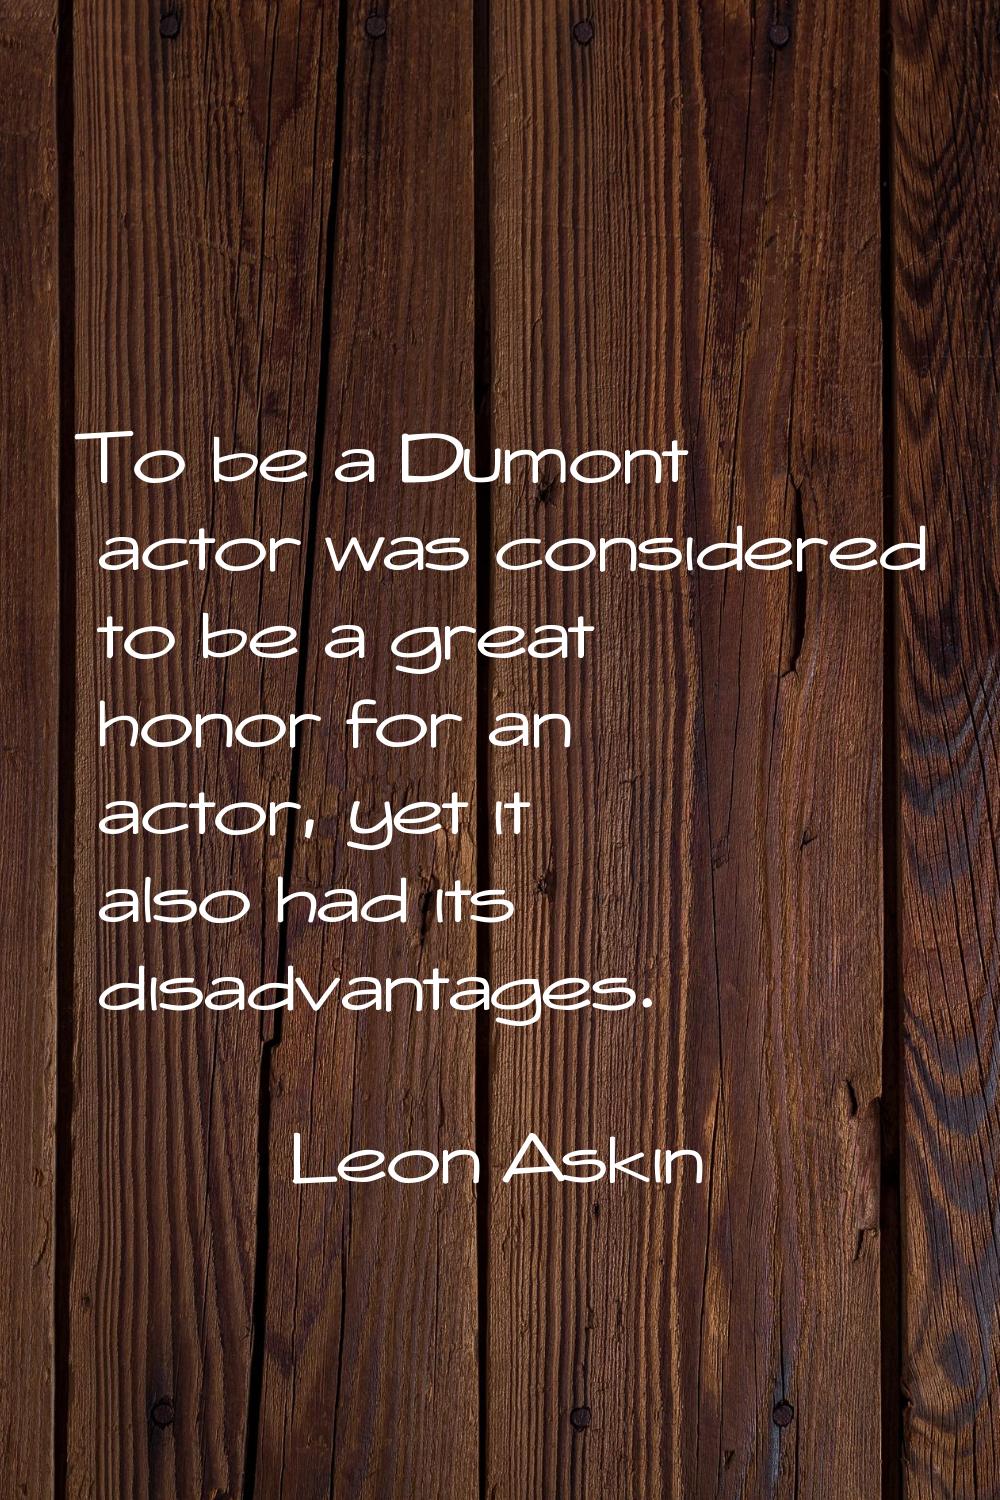 To be a Dumont actor was considered to be a great honor for an actor, yet it also had its disadvant